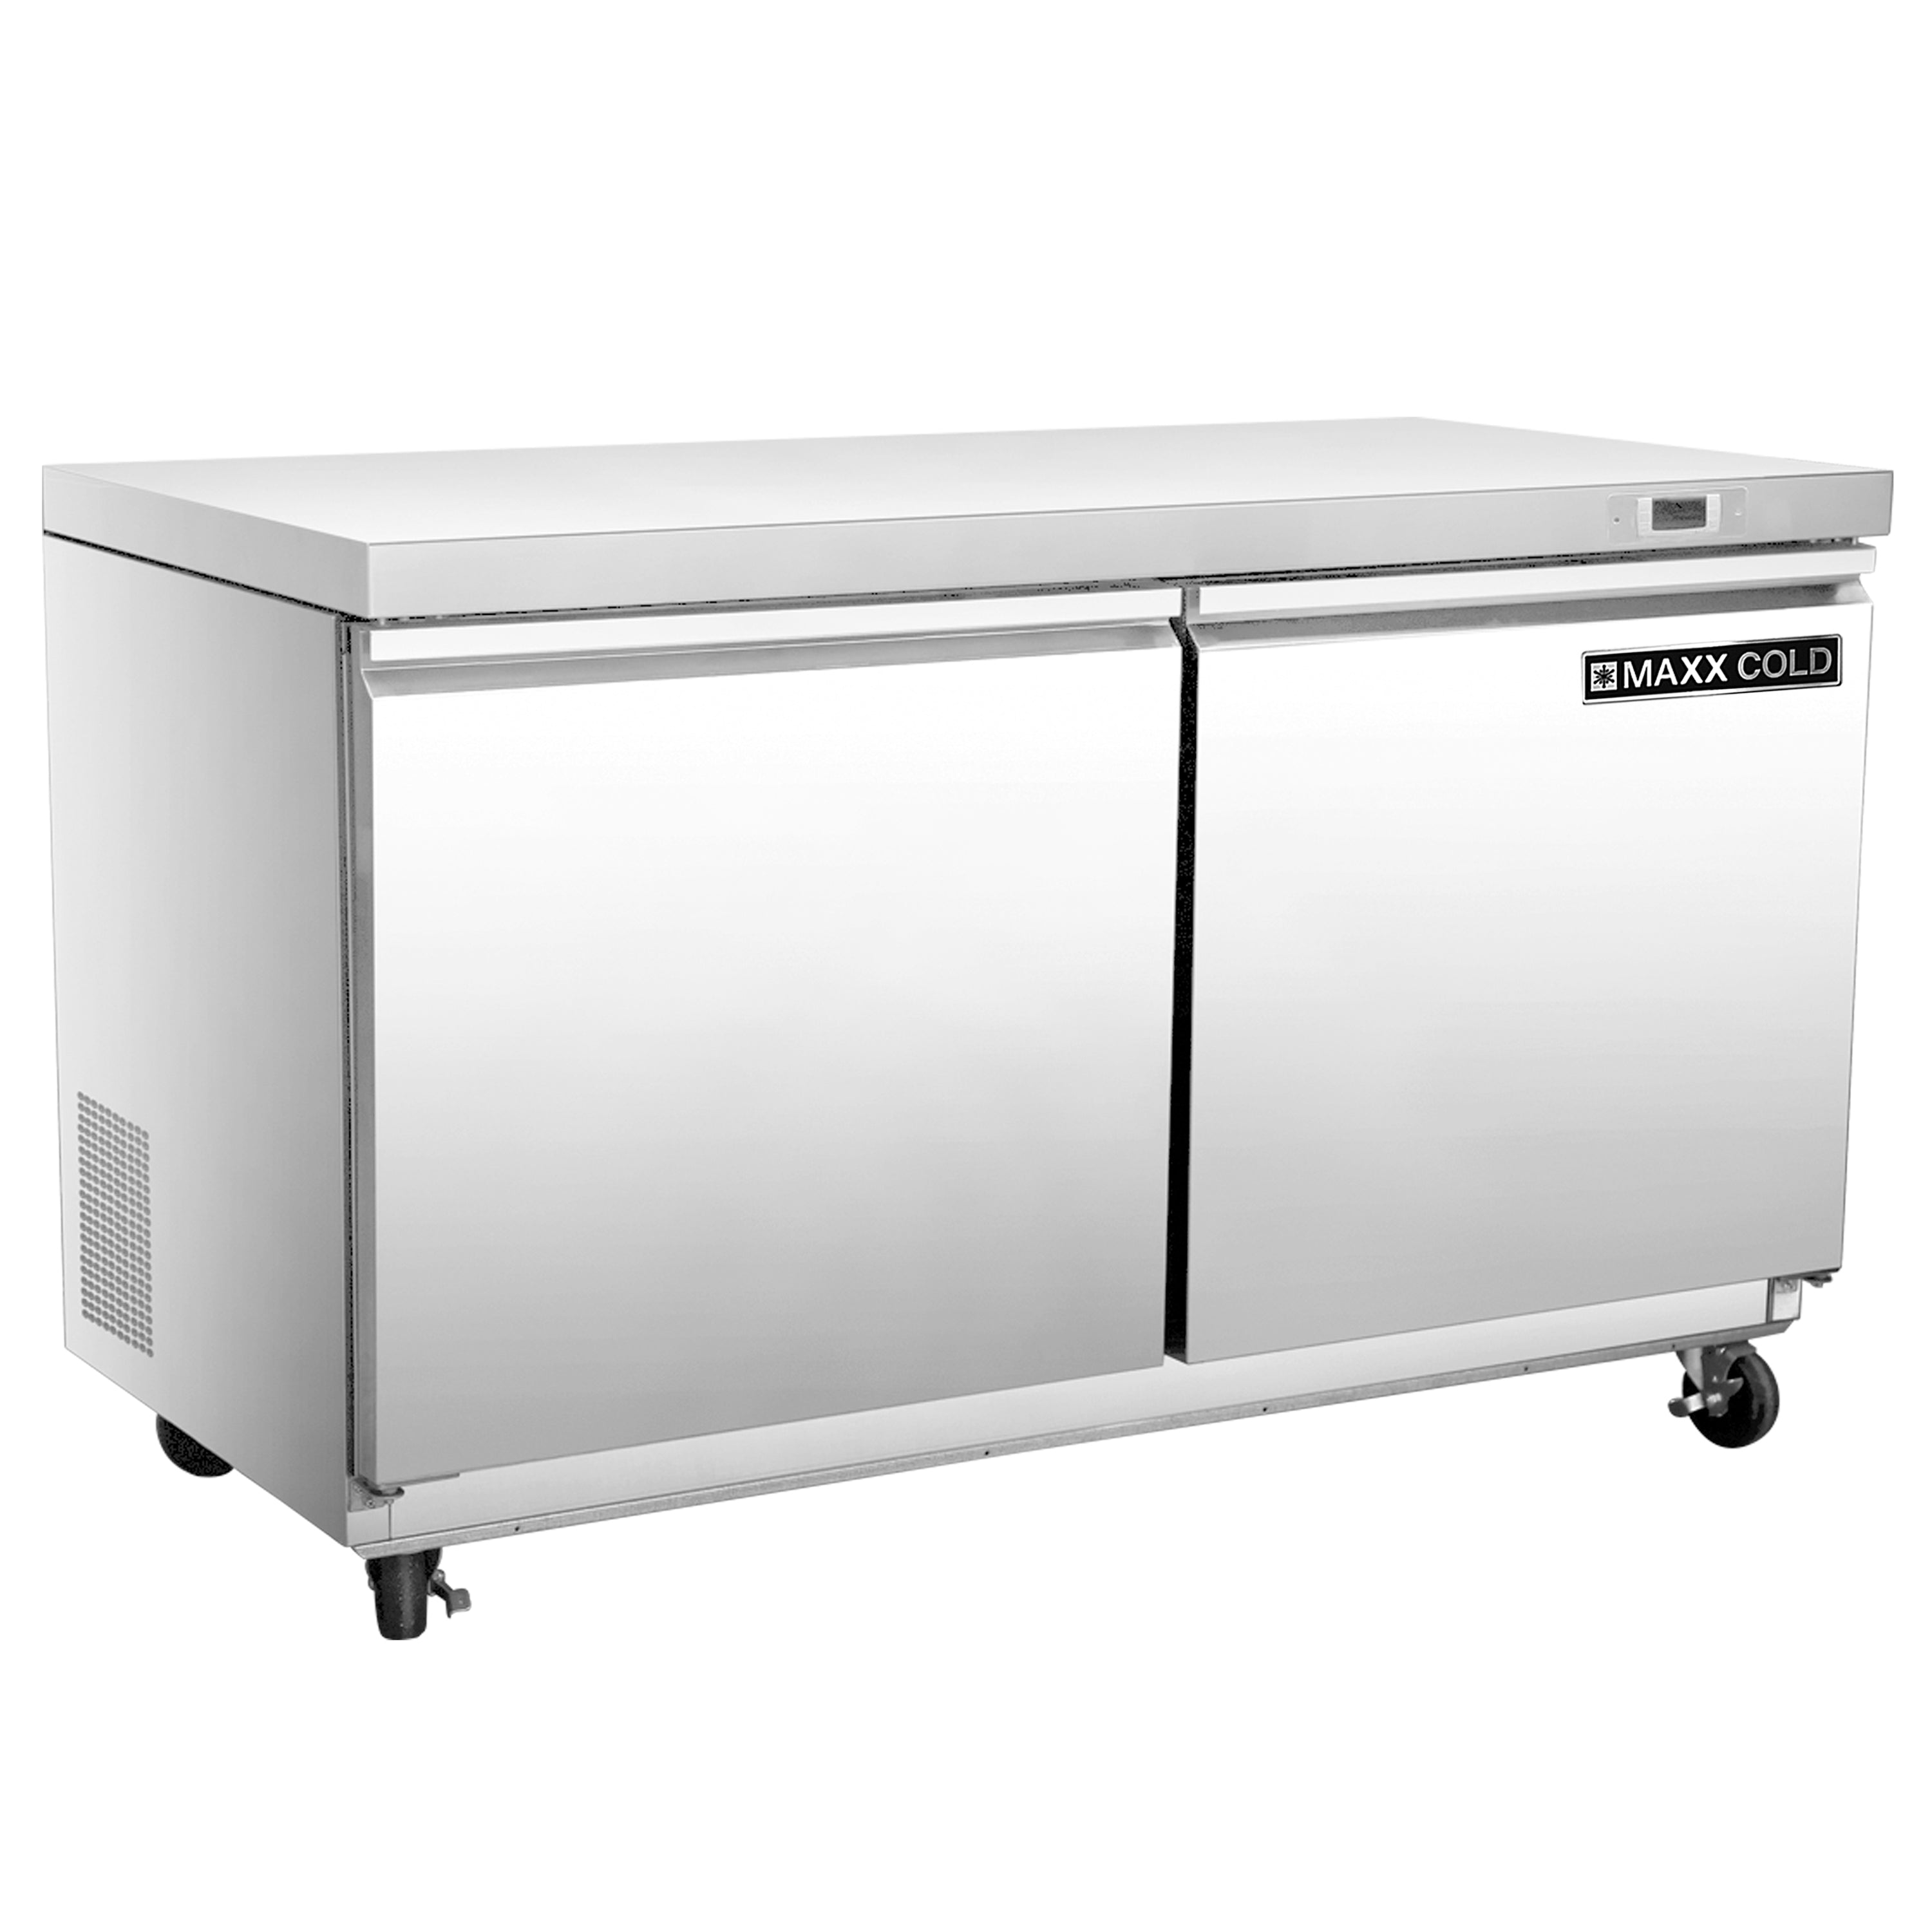 Maxx Cold - MXSF48UHC, Maxx Cold Double Door Undercounter Freezer, 48"W, 11.1 cu. ft. Storage Capacity, in Stainless Steel